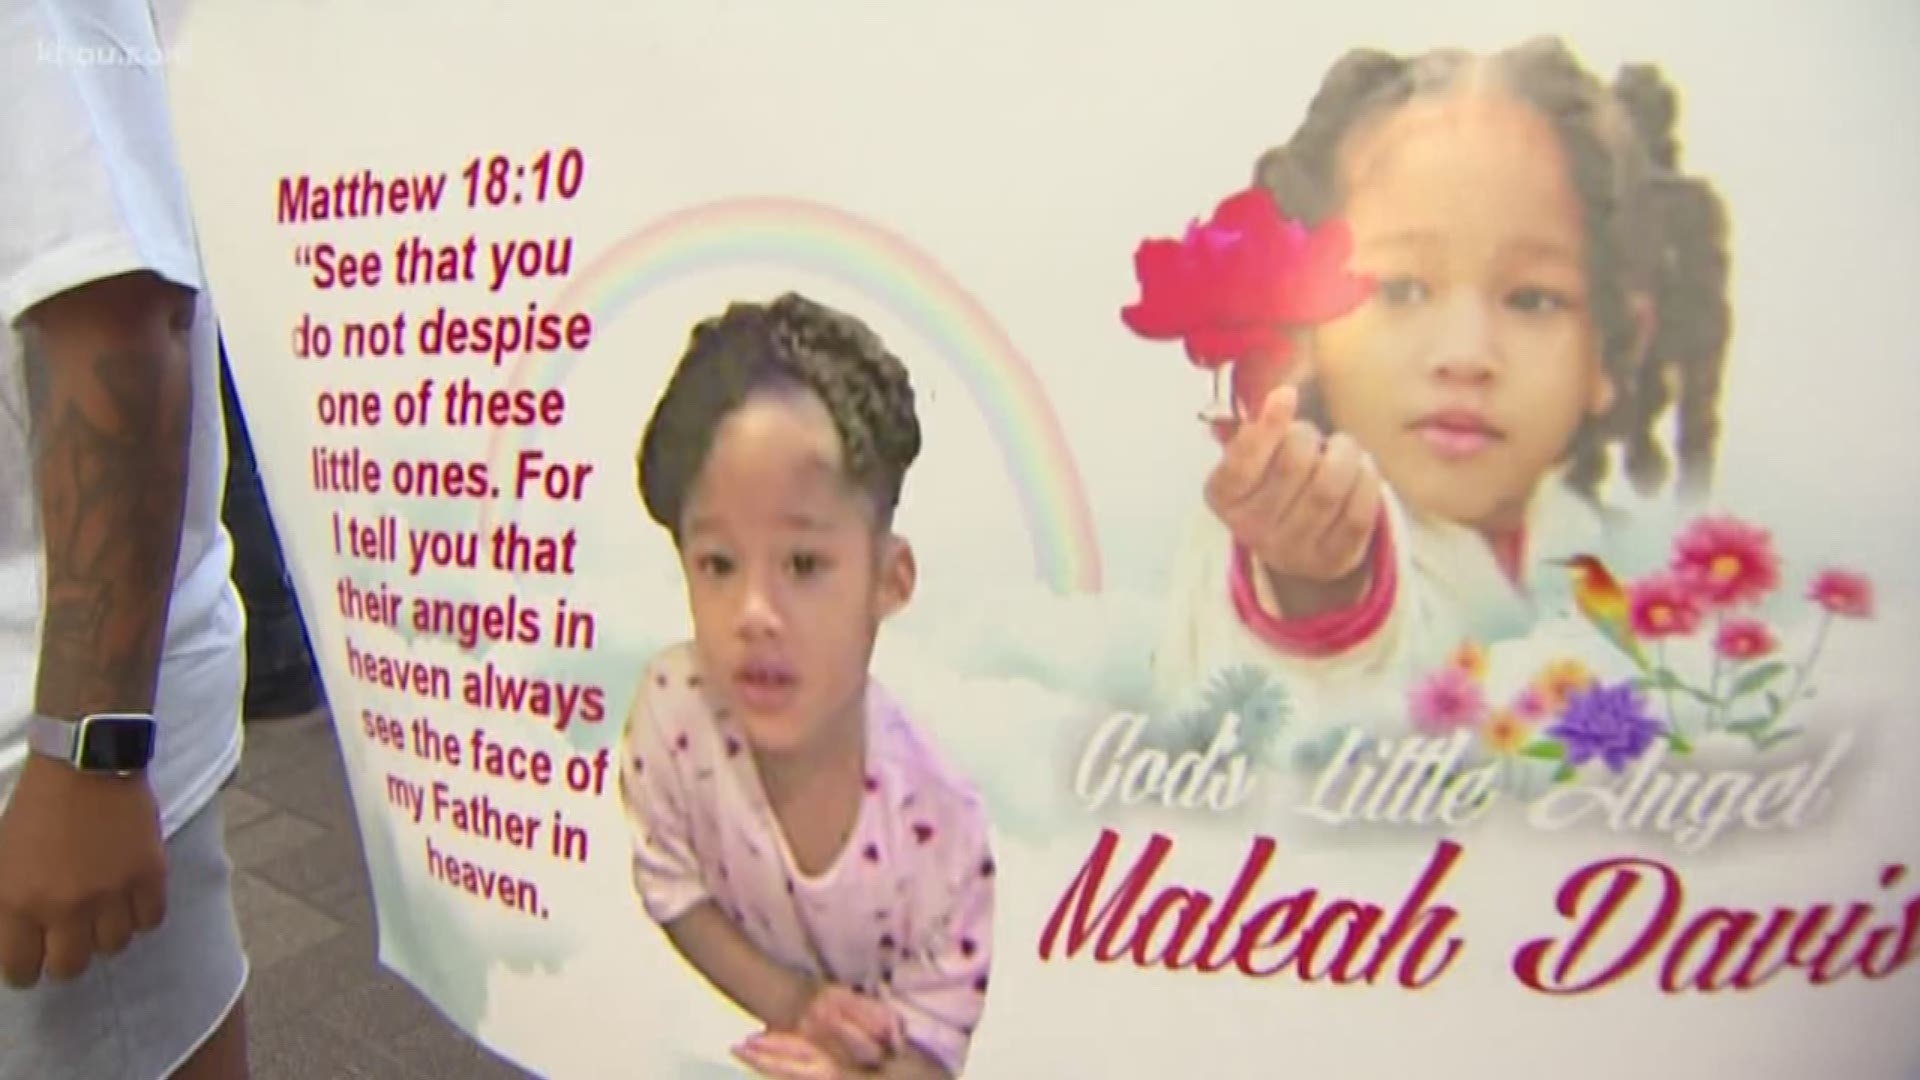 The city of Houston paid respects to Maleah Davis with a walk in downtown Sunday morning. The 4-year-old girl has captured hearts around the world and we're mourning her tragic death.